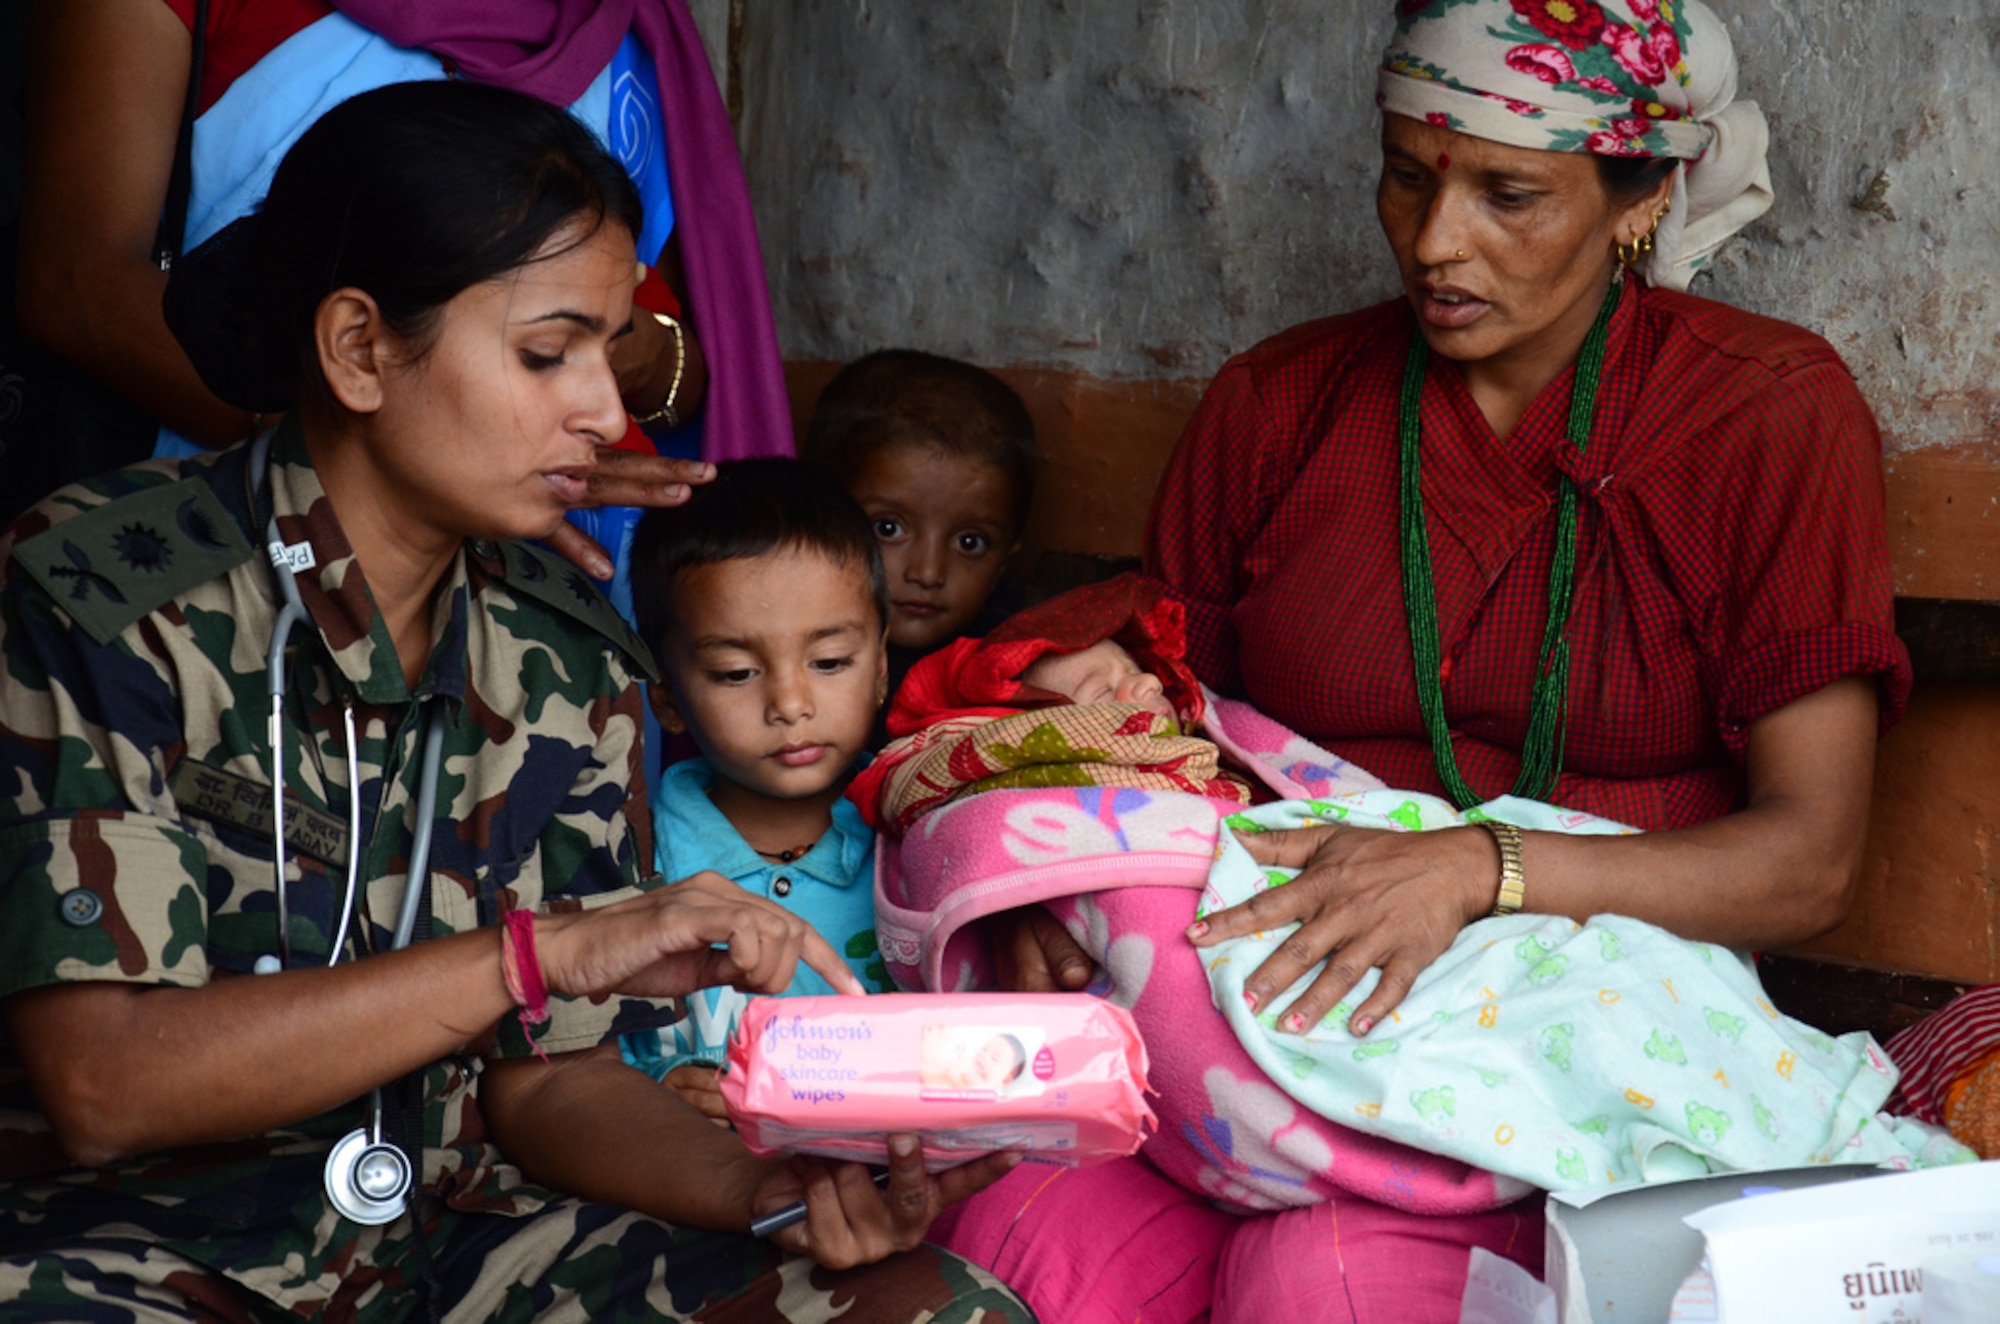 A Nepali woman listens to infant care advice from a Nepalese Army Doctor two
days after her baby was delivered and resuscitated by team Project HOPE and
Nepali health care professionals who were supporting Operation Pacific Angel
12-4 at Nau Danda Health Post of Dhikur Pokhari Village Development
Committee (VDC) of Kaski District, Nepal on Sept. 14, 2012. U.S. Pacific
Command's Operation Pacific Angel 12-4 in Nepal is a Pacific Air Forces
planned event that enhances humanitarian assistance and disaster relief
capabilities between the United States and Pacific partners. The U.S. was
invited by the Nepal government to provide support by conducting medical,
optometry, and civil engineering programs. Operations like Pacific Angel
build and sustain relationships with our multinational partners, and
non-governmental agencies in the Asia-Pacific region. (Courtesy photo)
